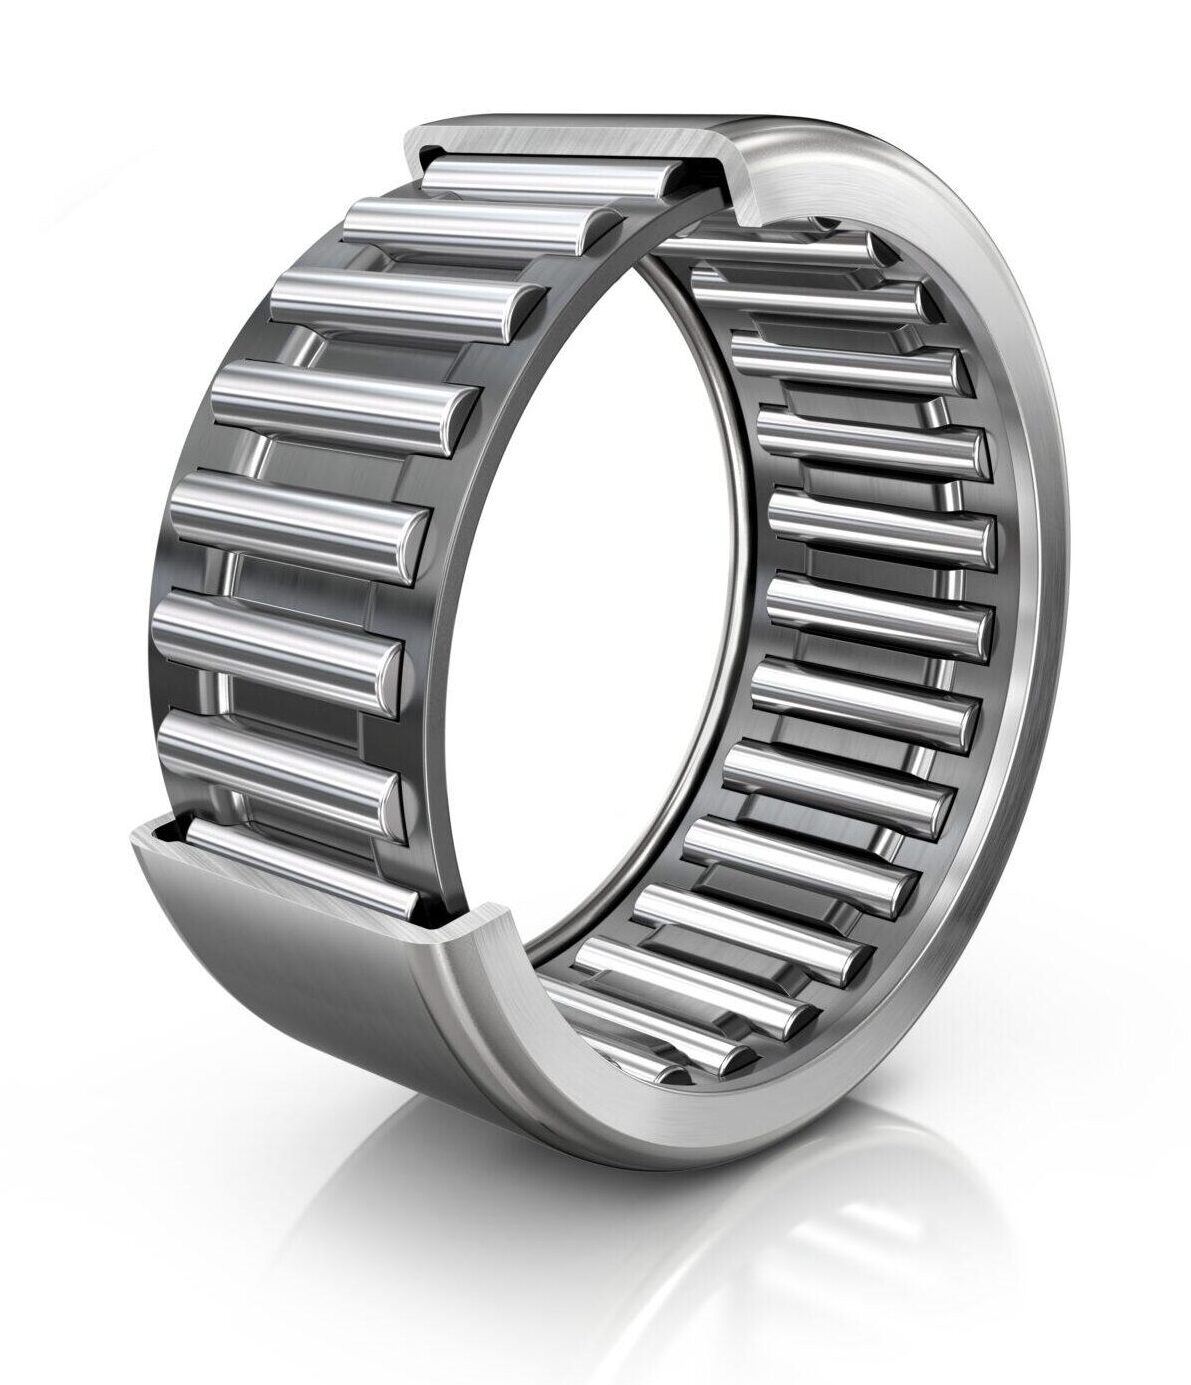 A needle roller bearing with cross section is shown.